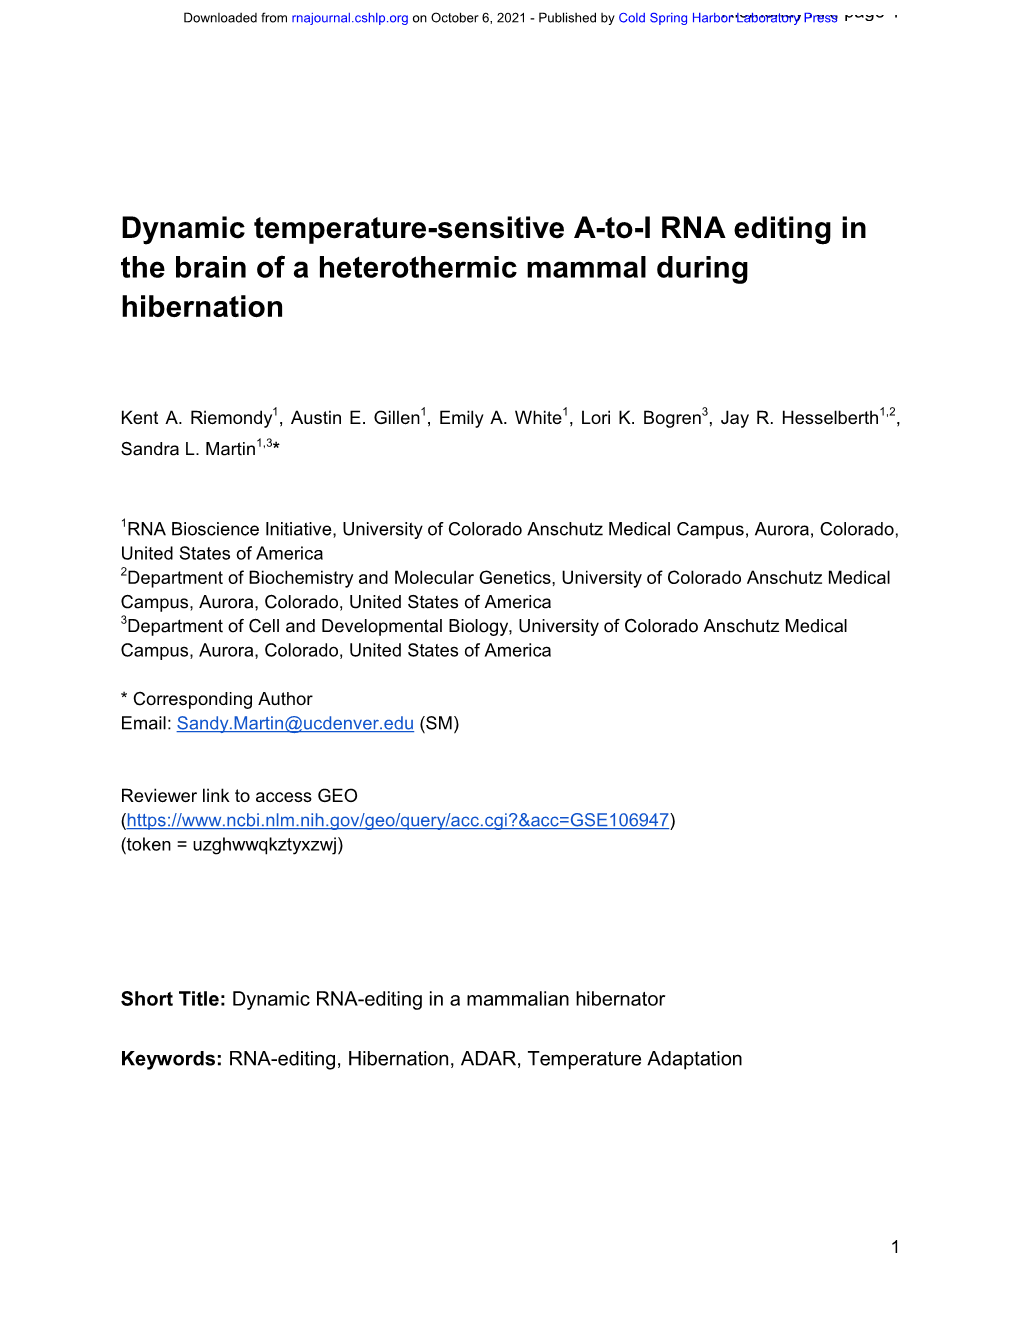 Dynamic Temperature-Sensitive A-To-I RNA Editing in the Brain of a Heterothermic Mammal During Hibernation